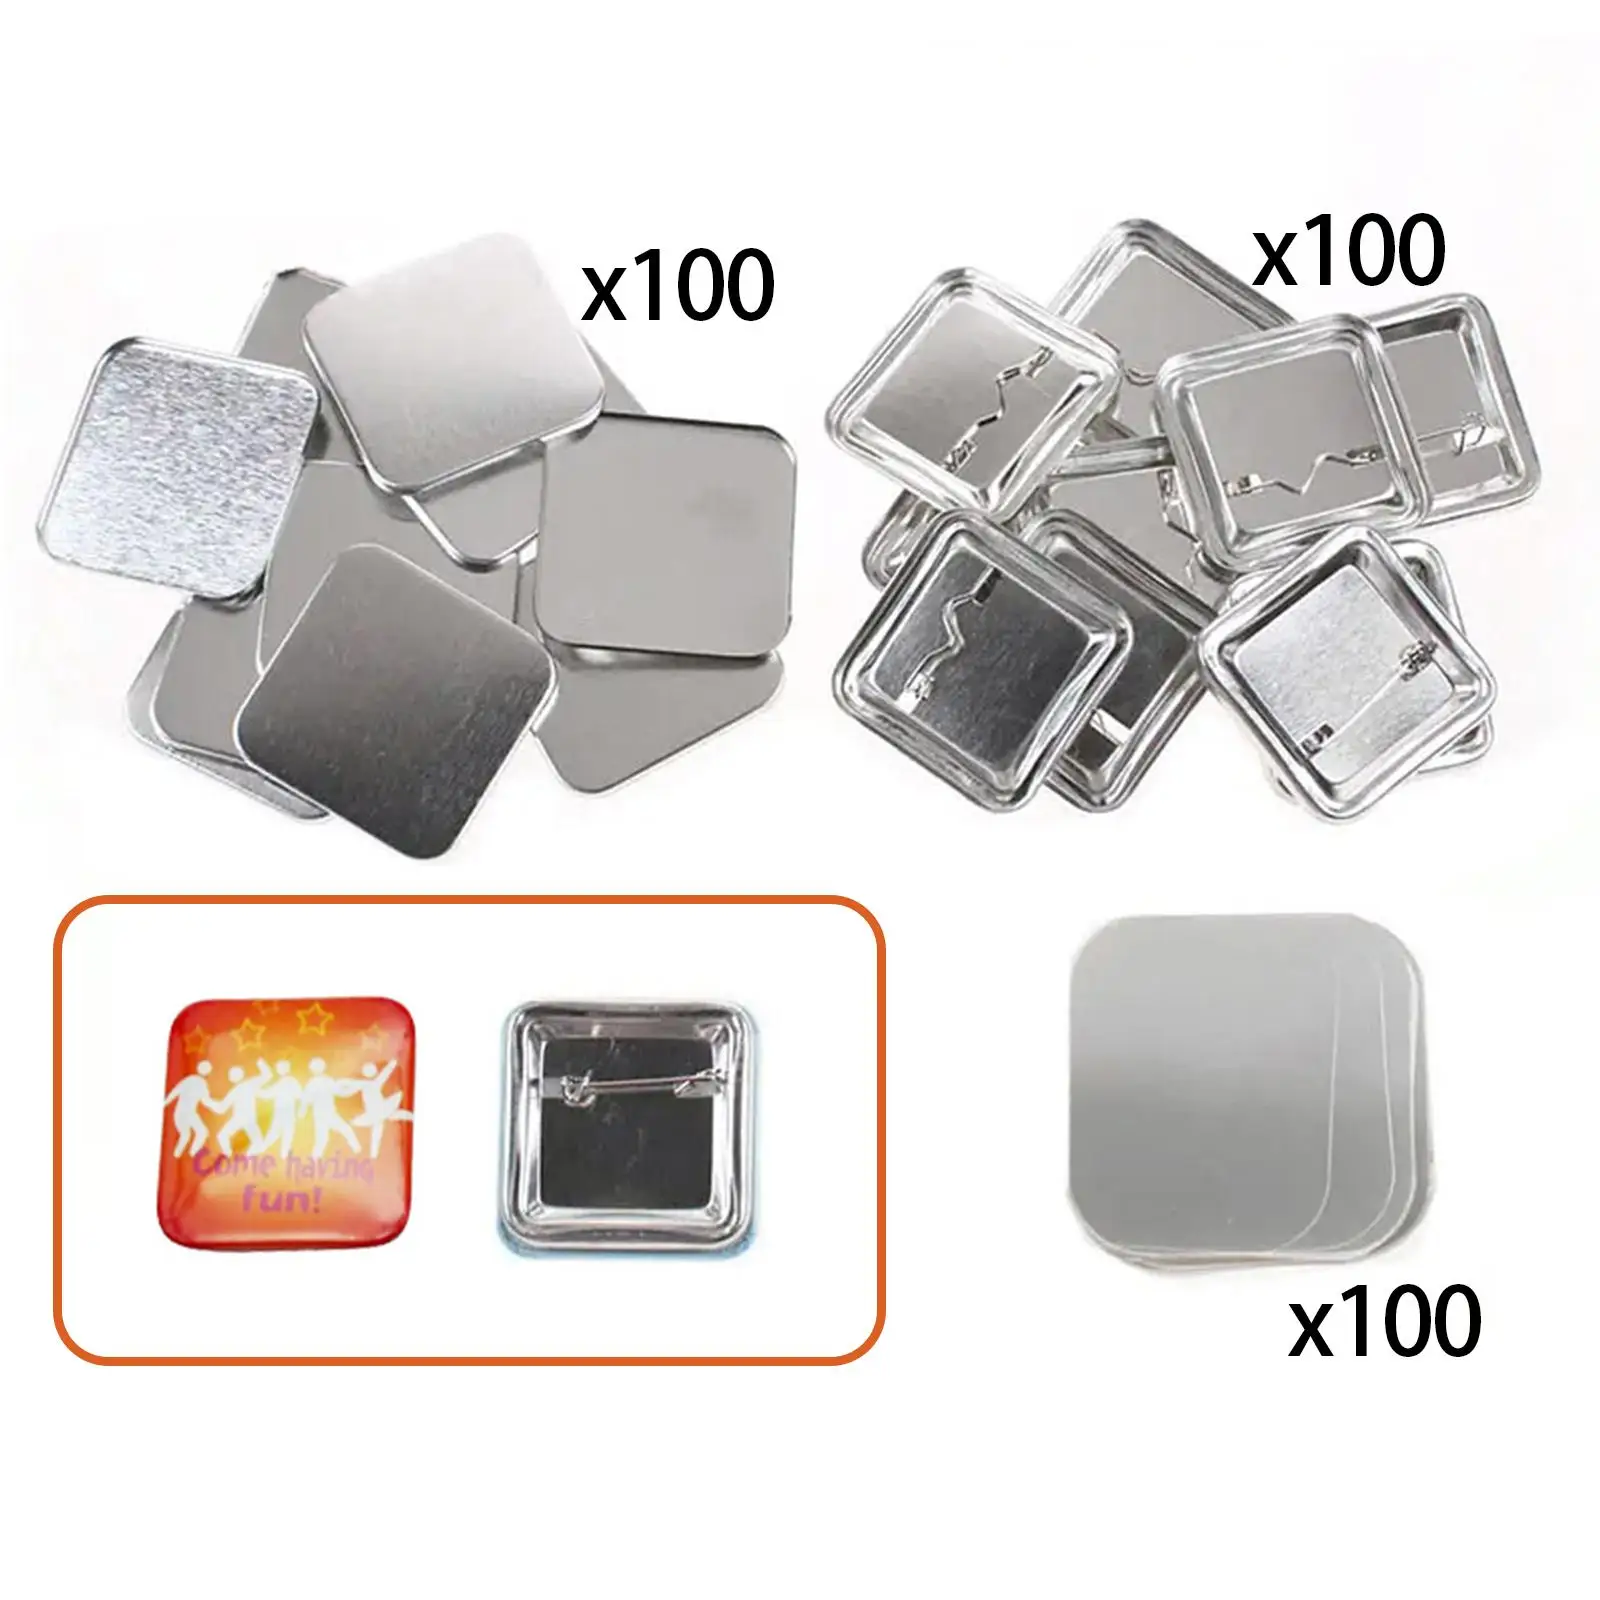 100Sets Blank Button Badge Parts Clear Mylar Square Shape Component Metal Button Material Badge Kit for DIY Gifts Crafting